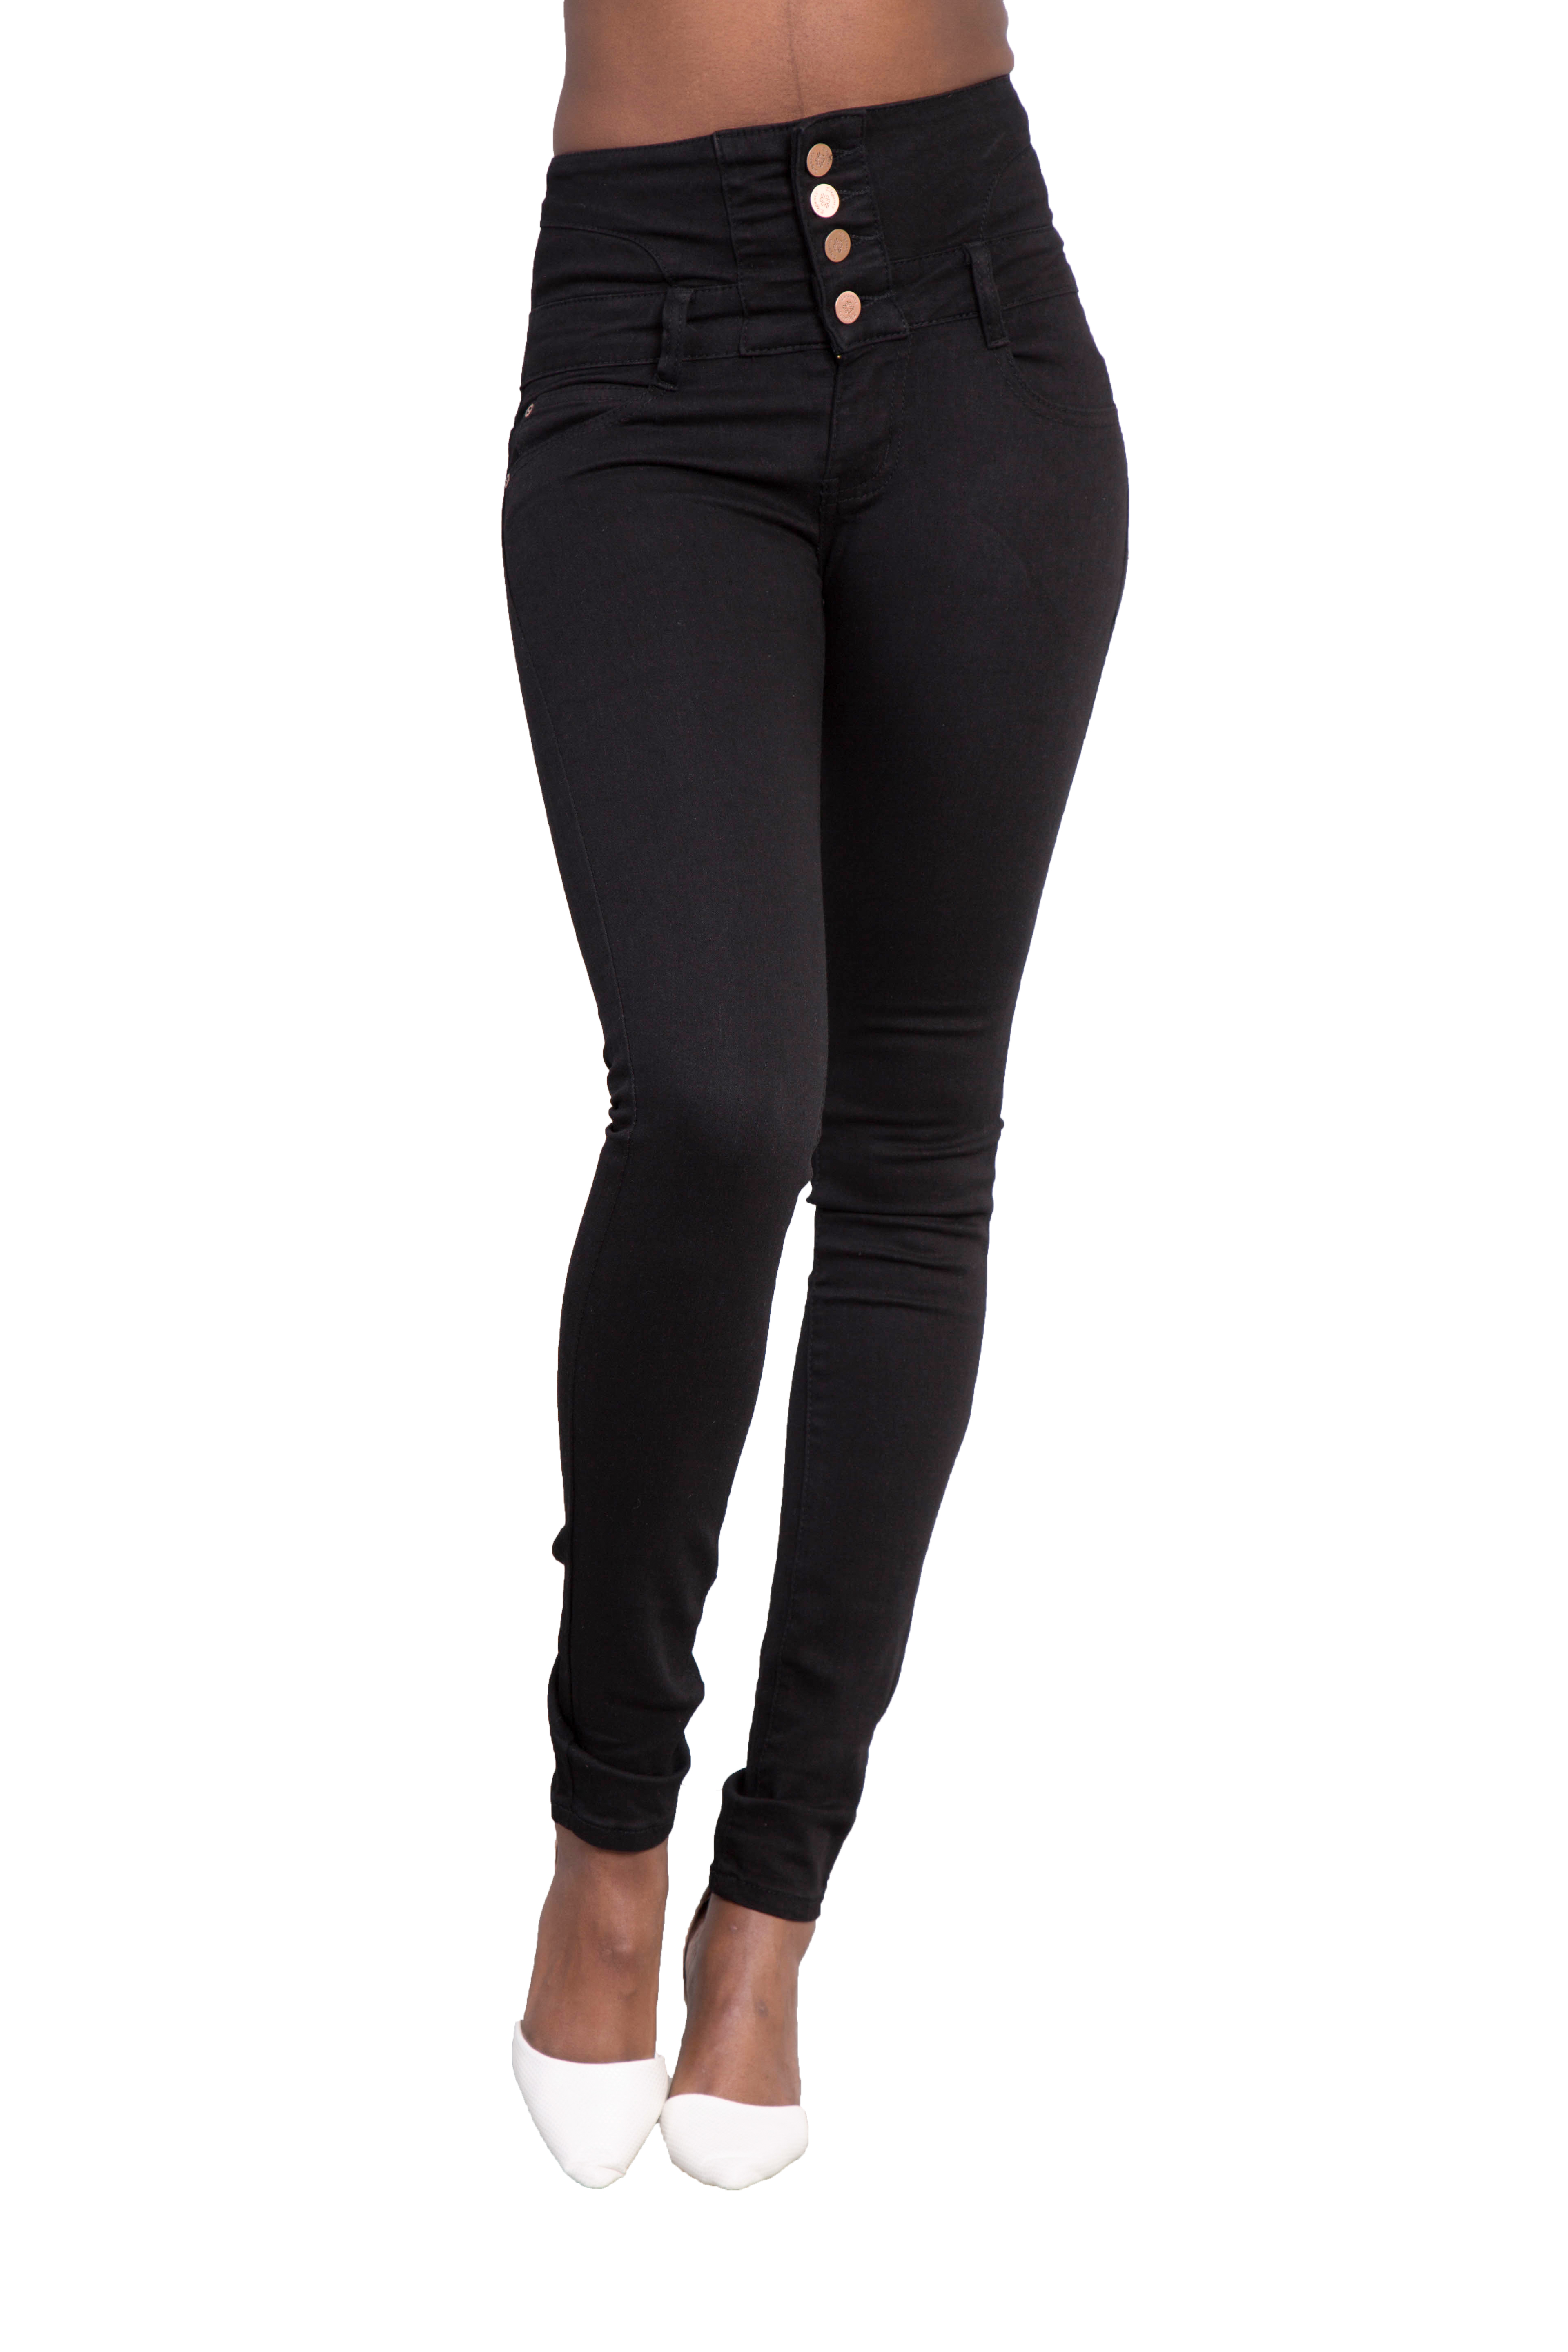 Women Black Sexy Skinny Jeans Ladies High Waisted Pants Size 6 8 10 12 ...